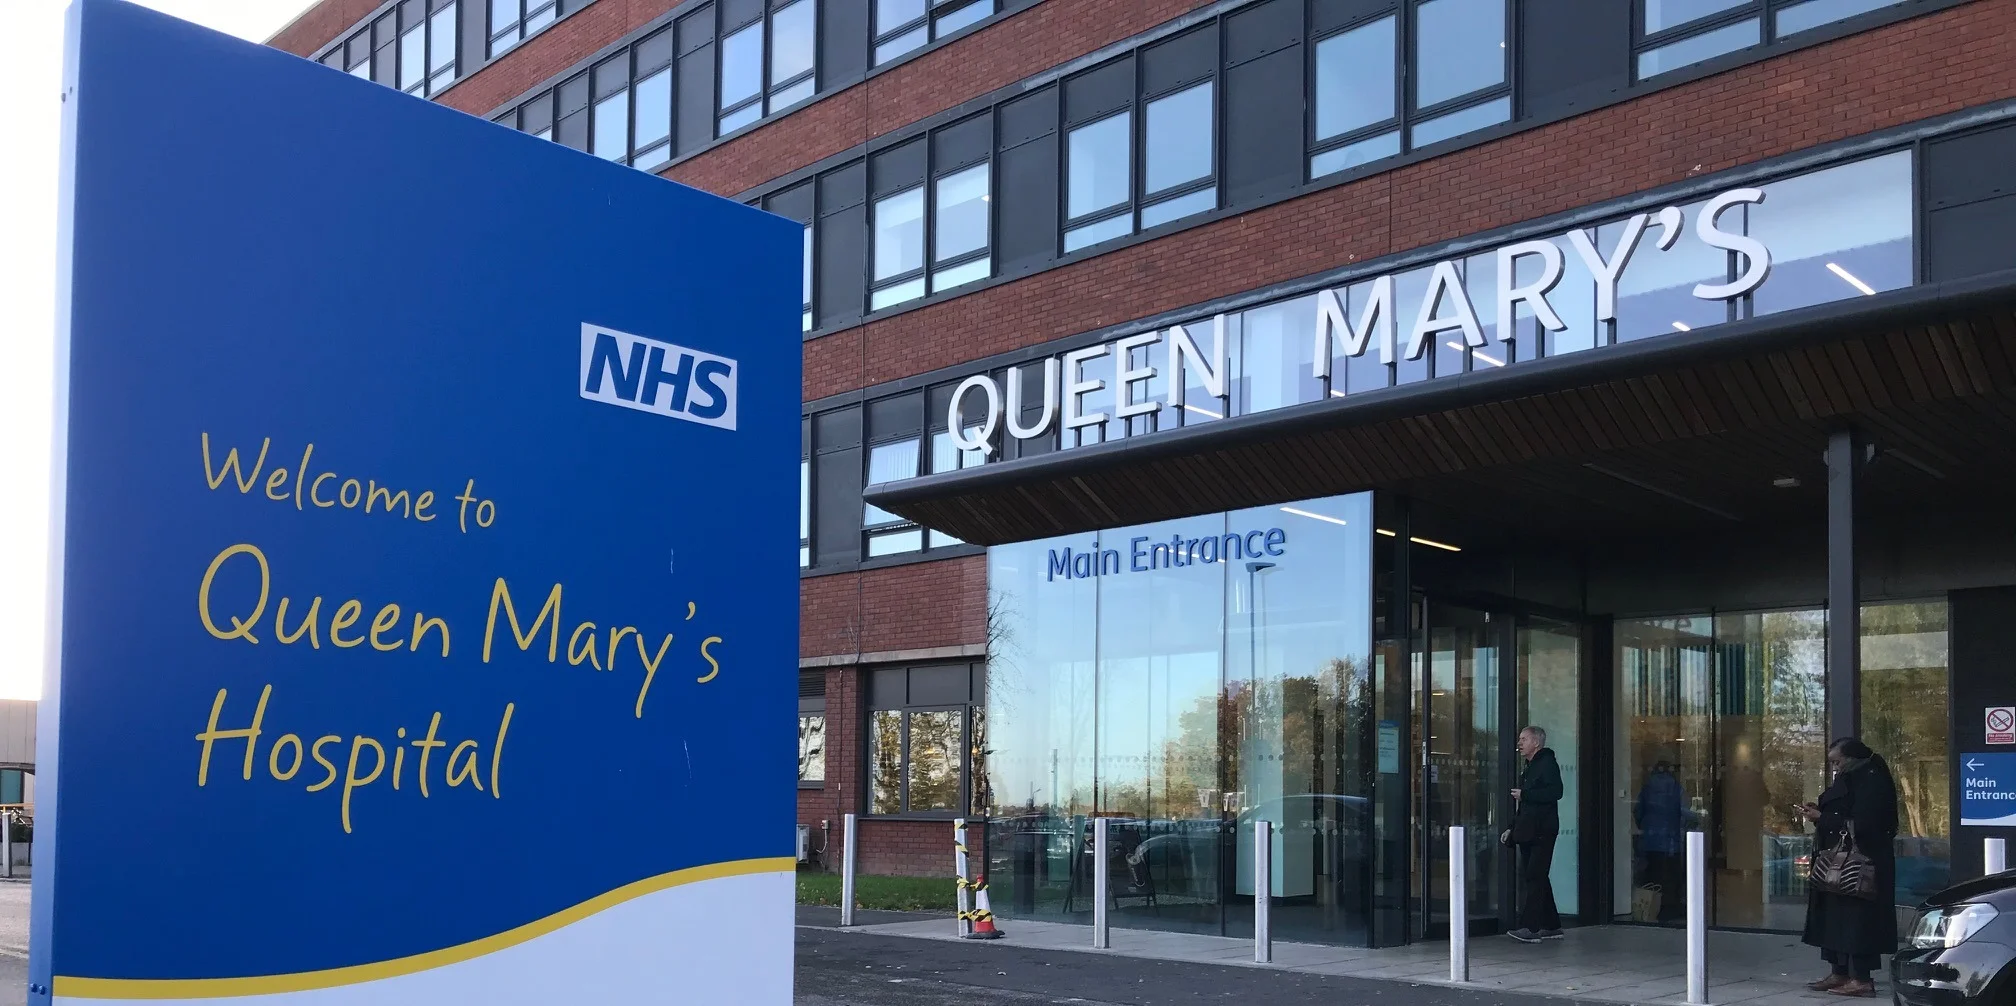 Queen Mary's Hospital